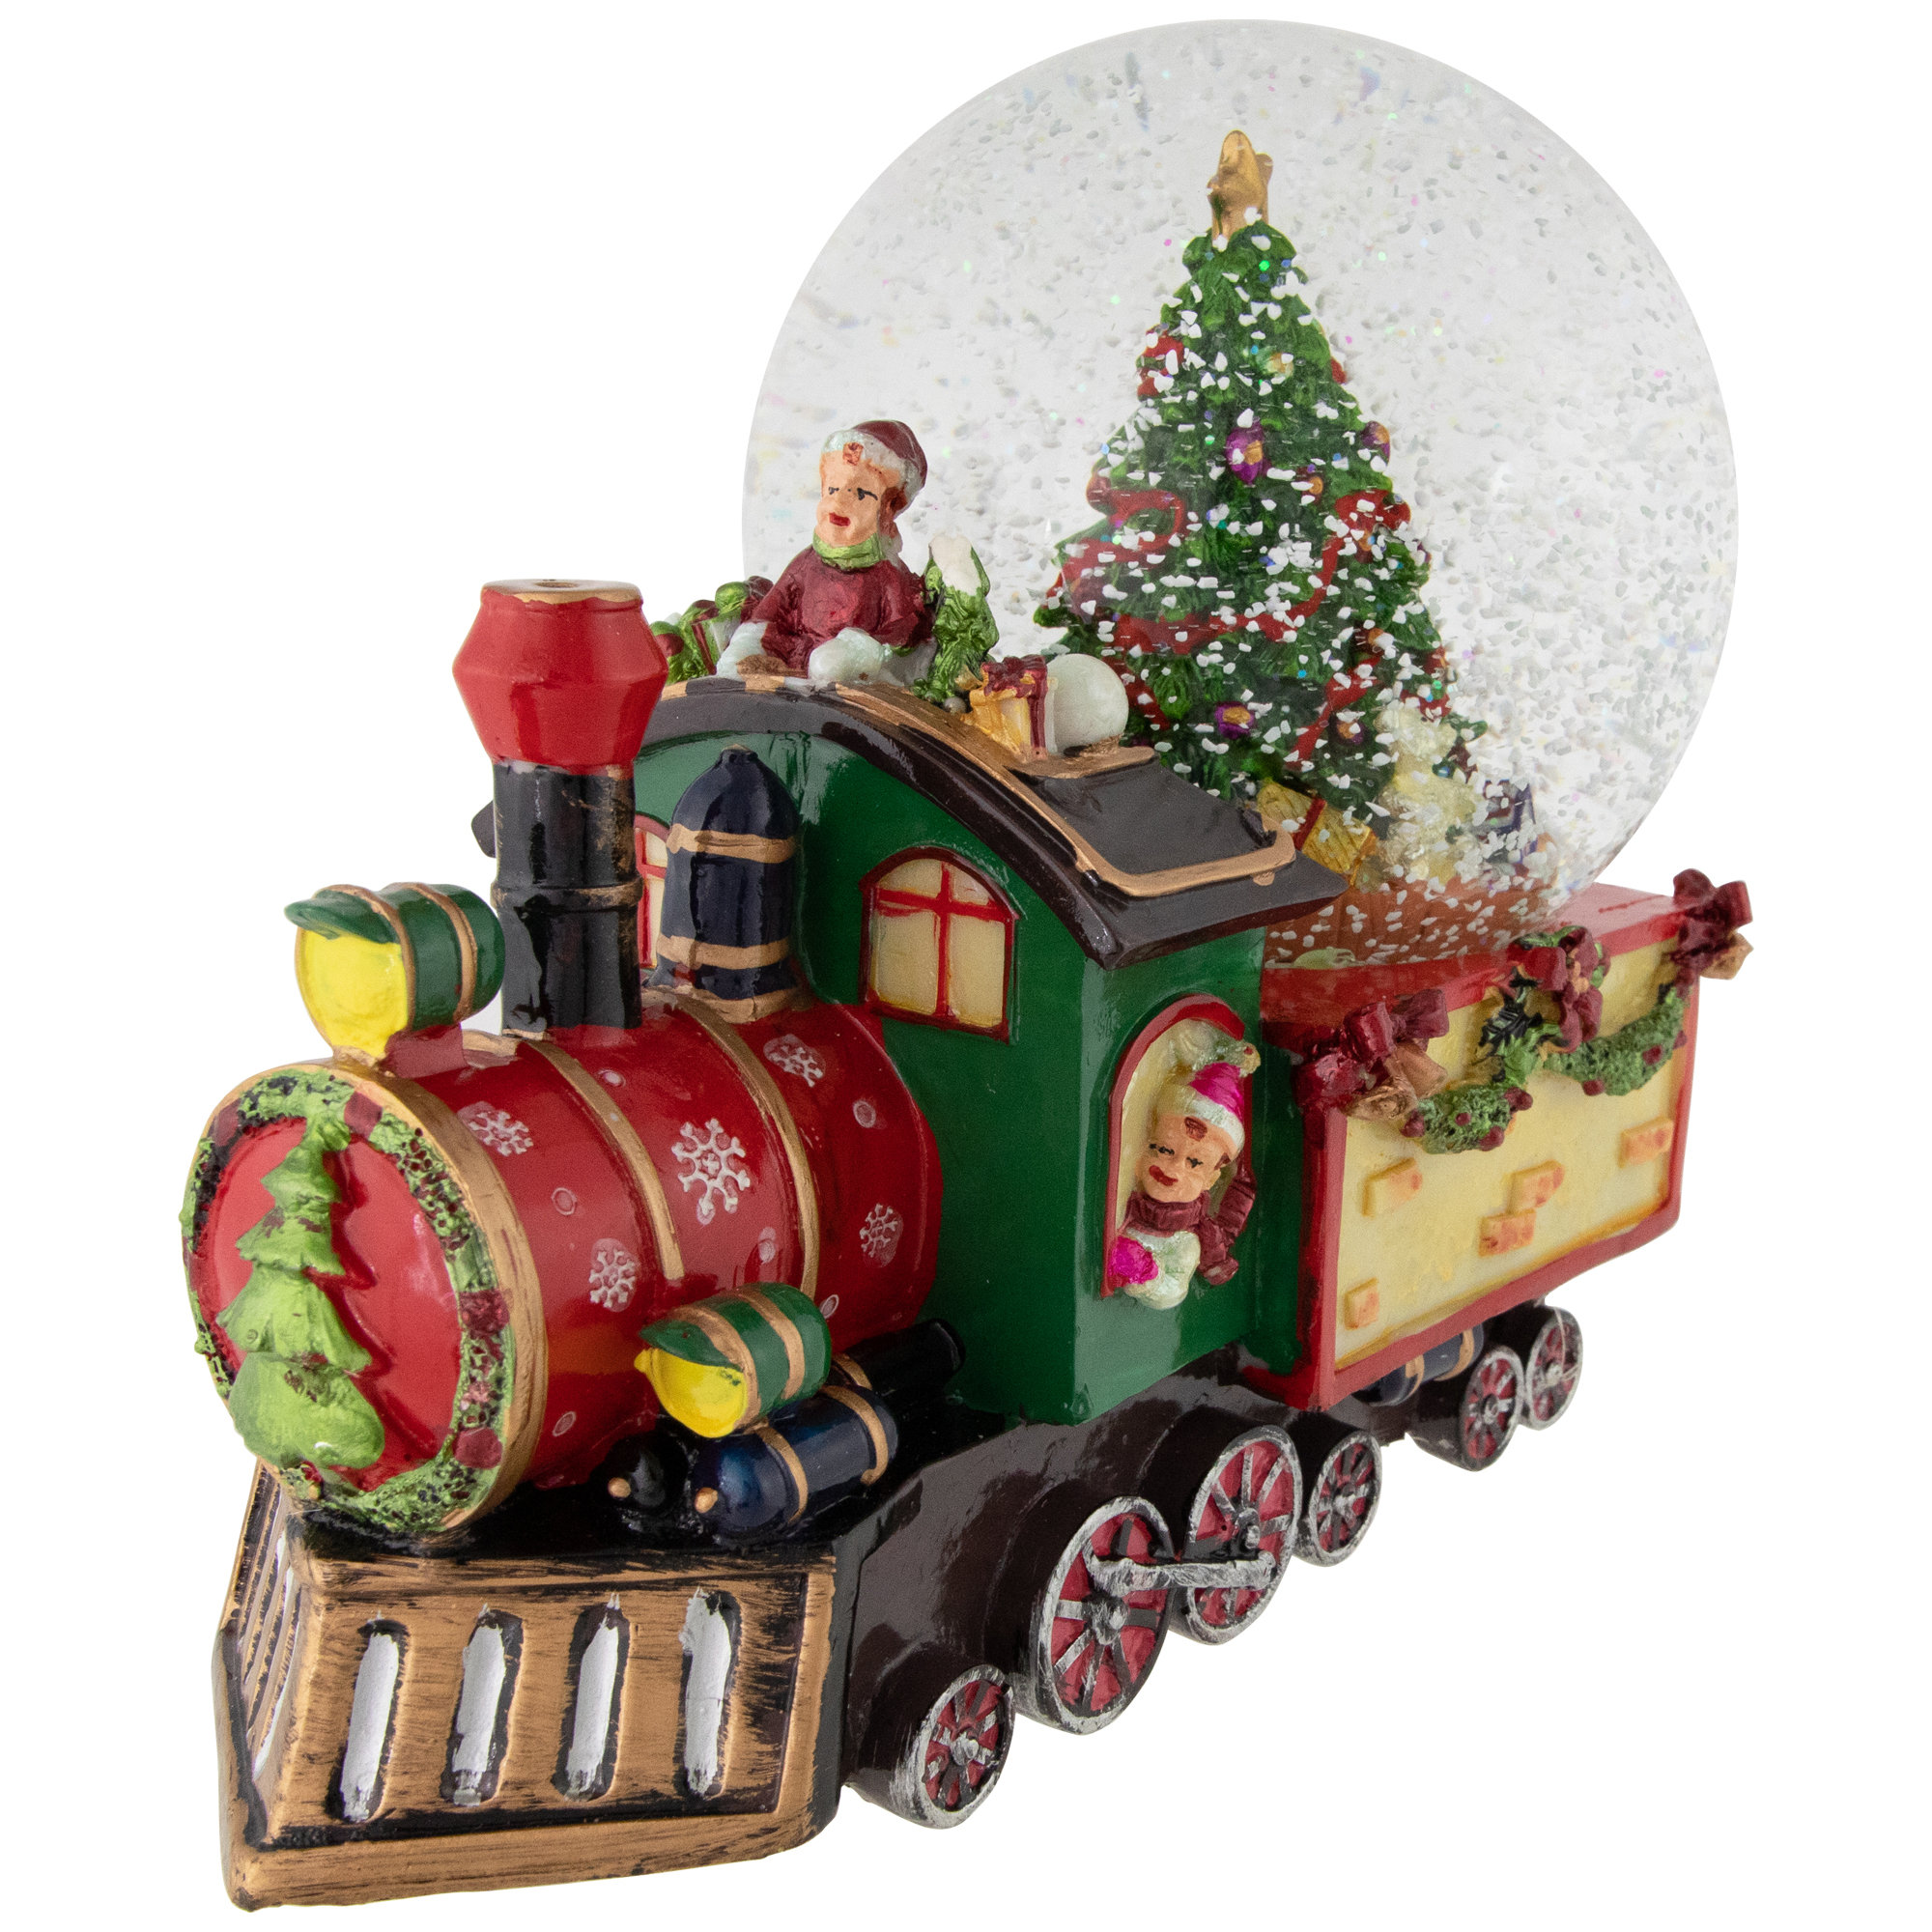  Arts and Crafts for Kids Ages 2-4 Girls Rotating Music  Christmas Locomotive Snow Car Gift Music Box Indoor Decoration Christmas  Decoration Wooden DIY Sleigh Ornaments DIY Crafts for (Red, One